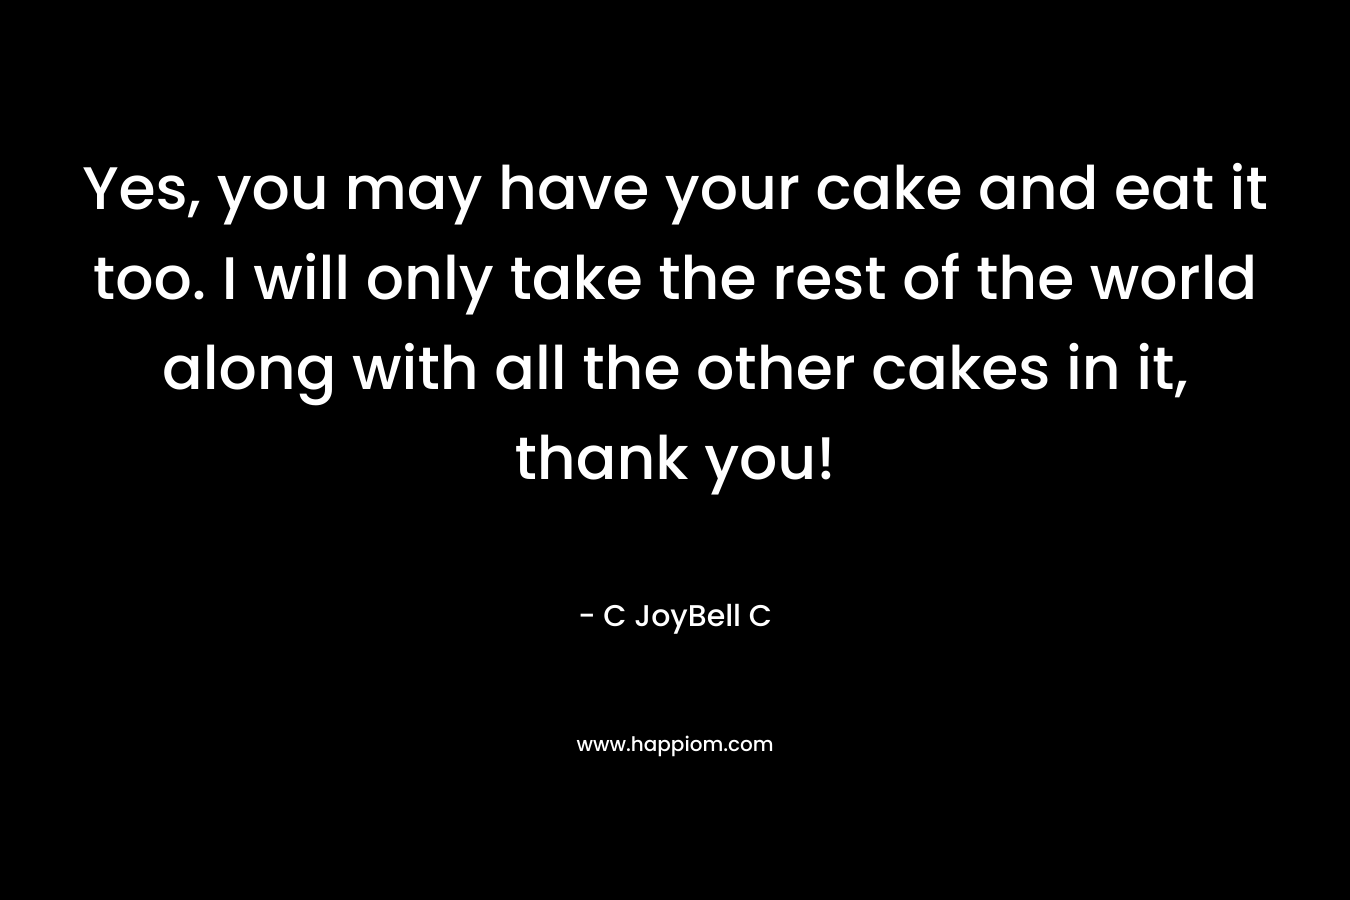 Yes, you may have your cake and eat it too. I will only take the rest of the world along with all the other cakes in it, thank you!